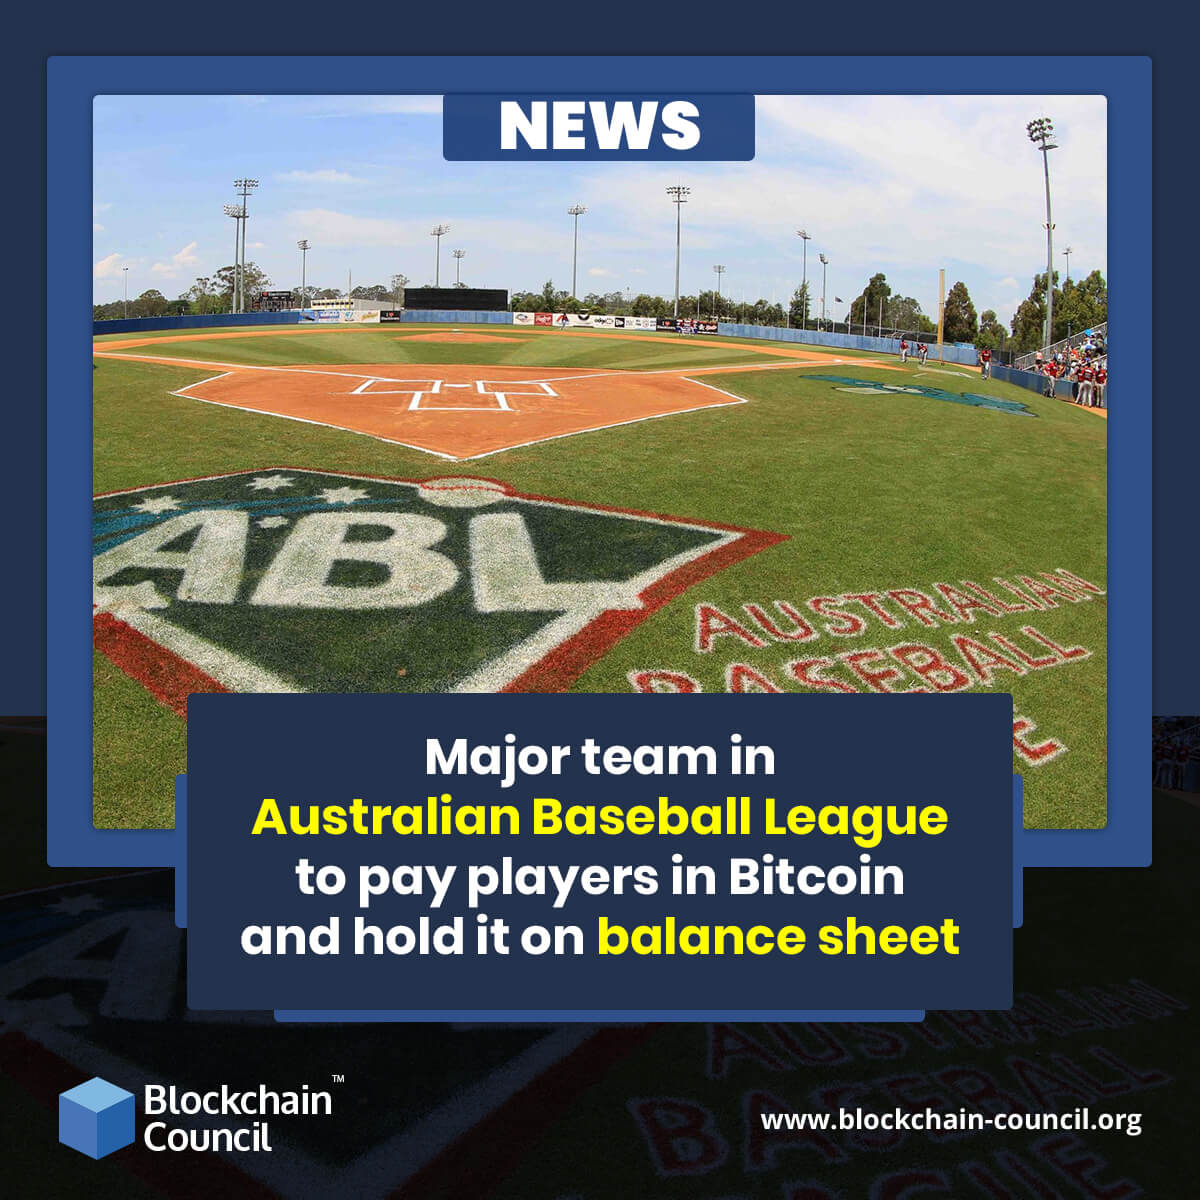 Major team in Australian Baseball League to pay players in Bitcoin and hold it on balance sheet